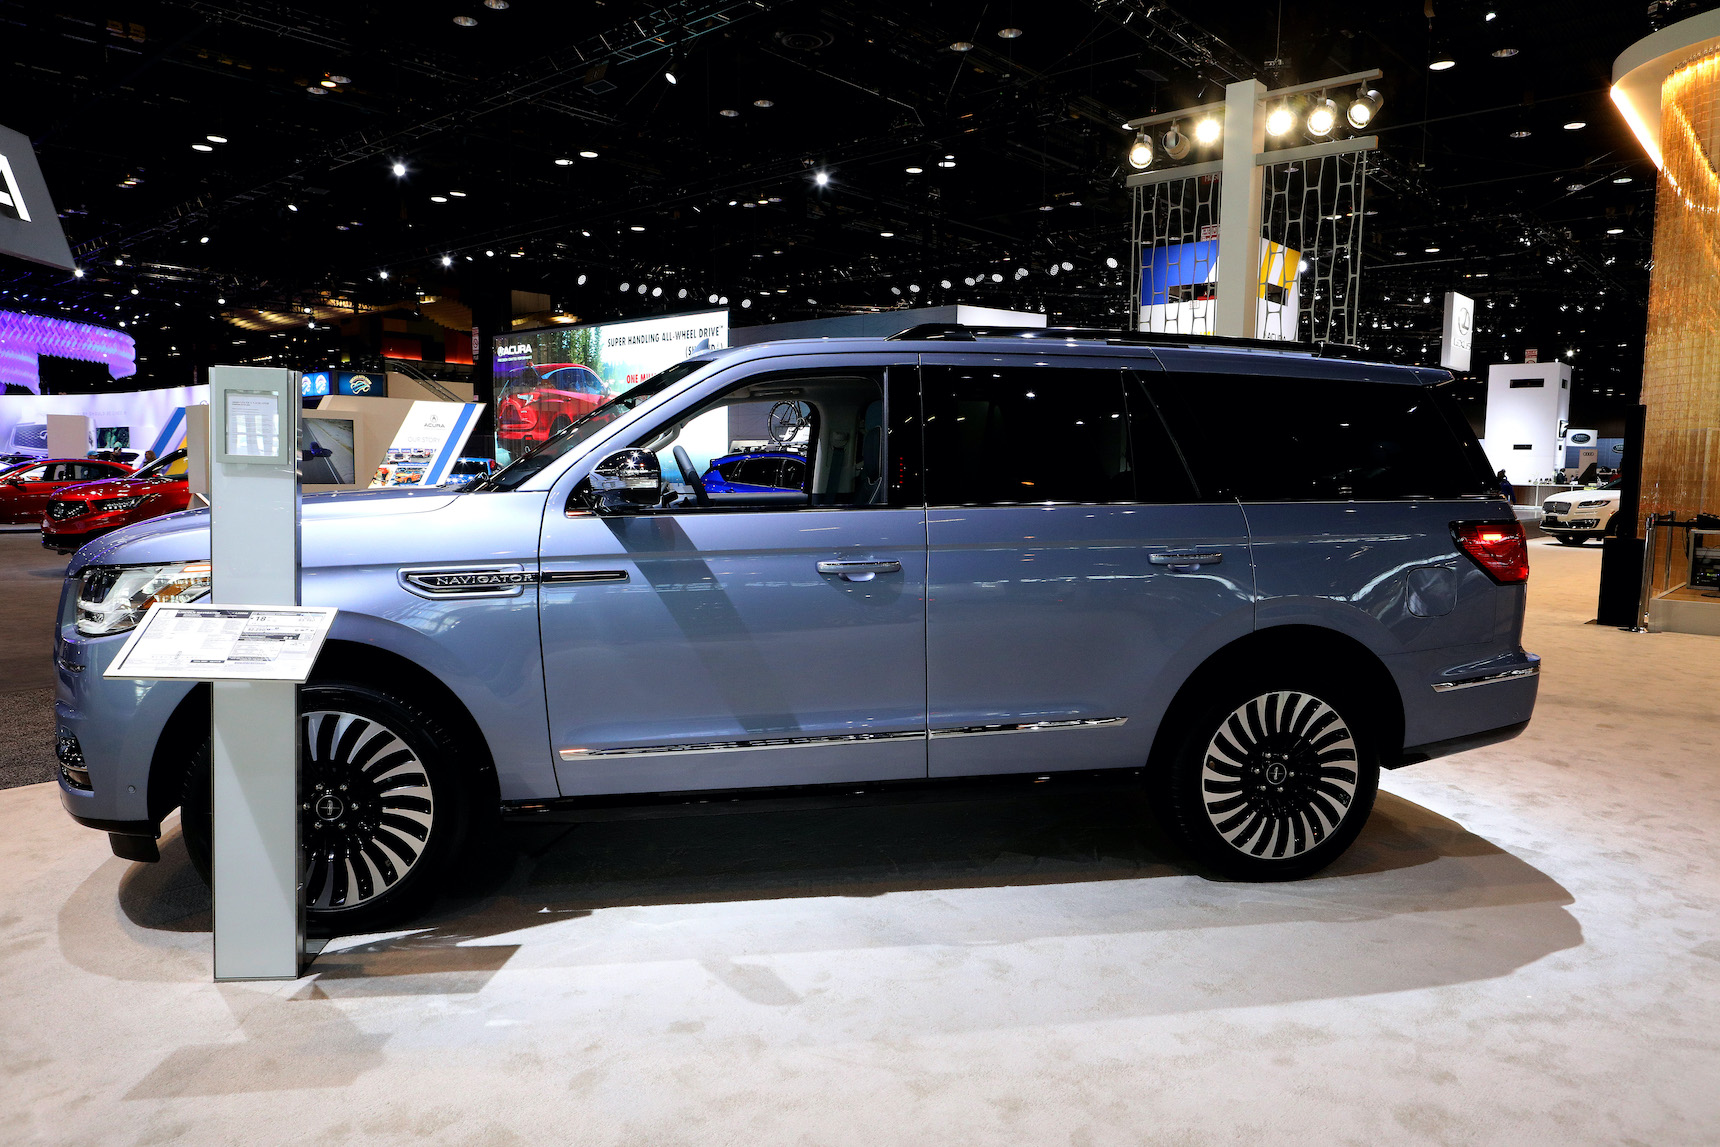 2020 Lincoln Navigator is on display at the 112th Annual Chicago Auto Show at McCormick Place